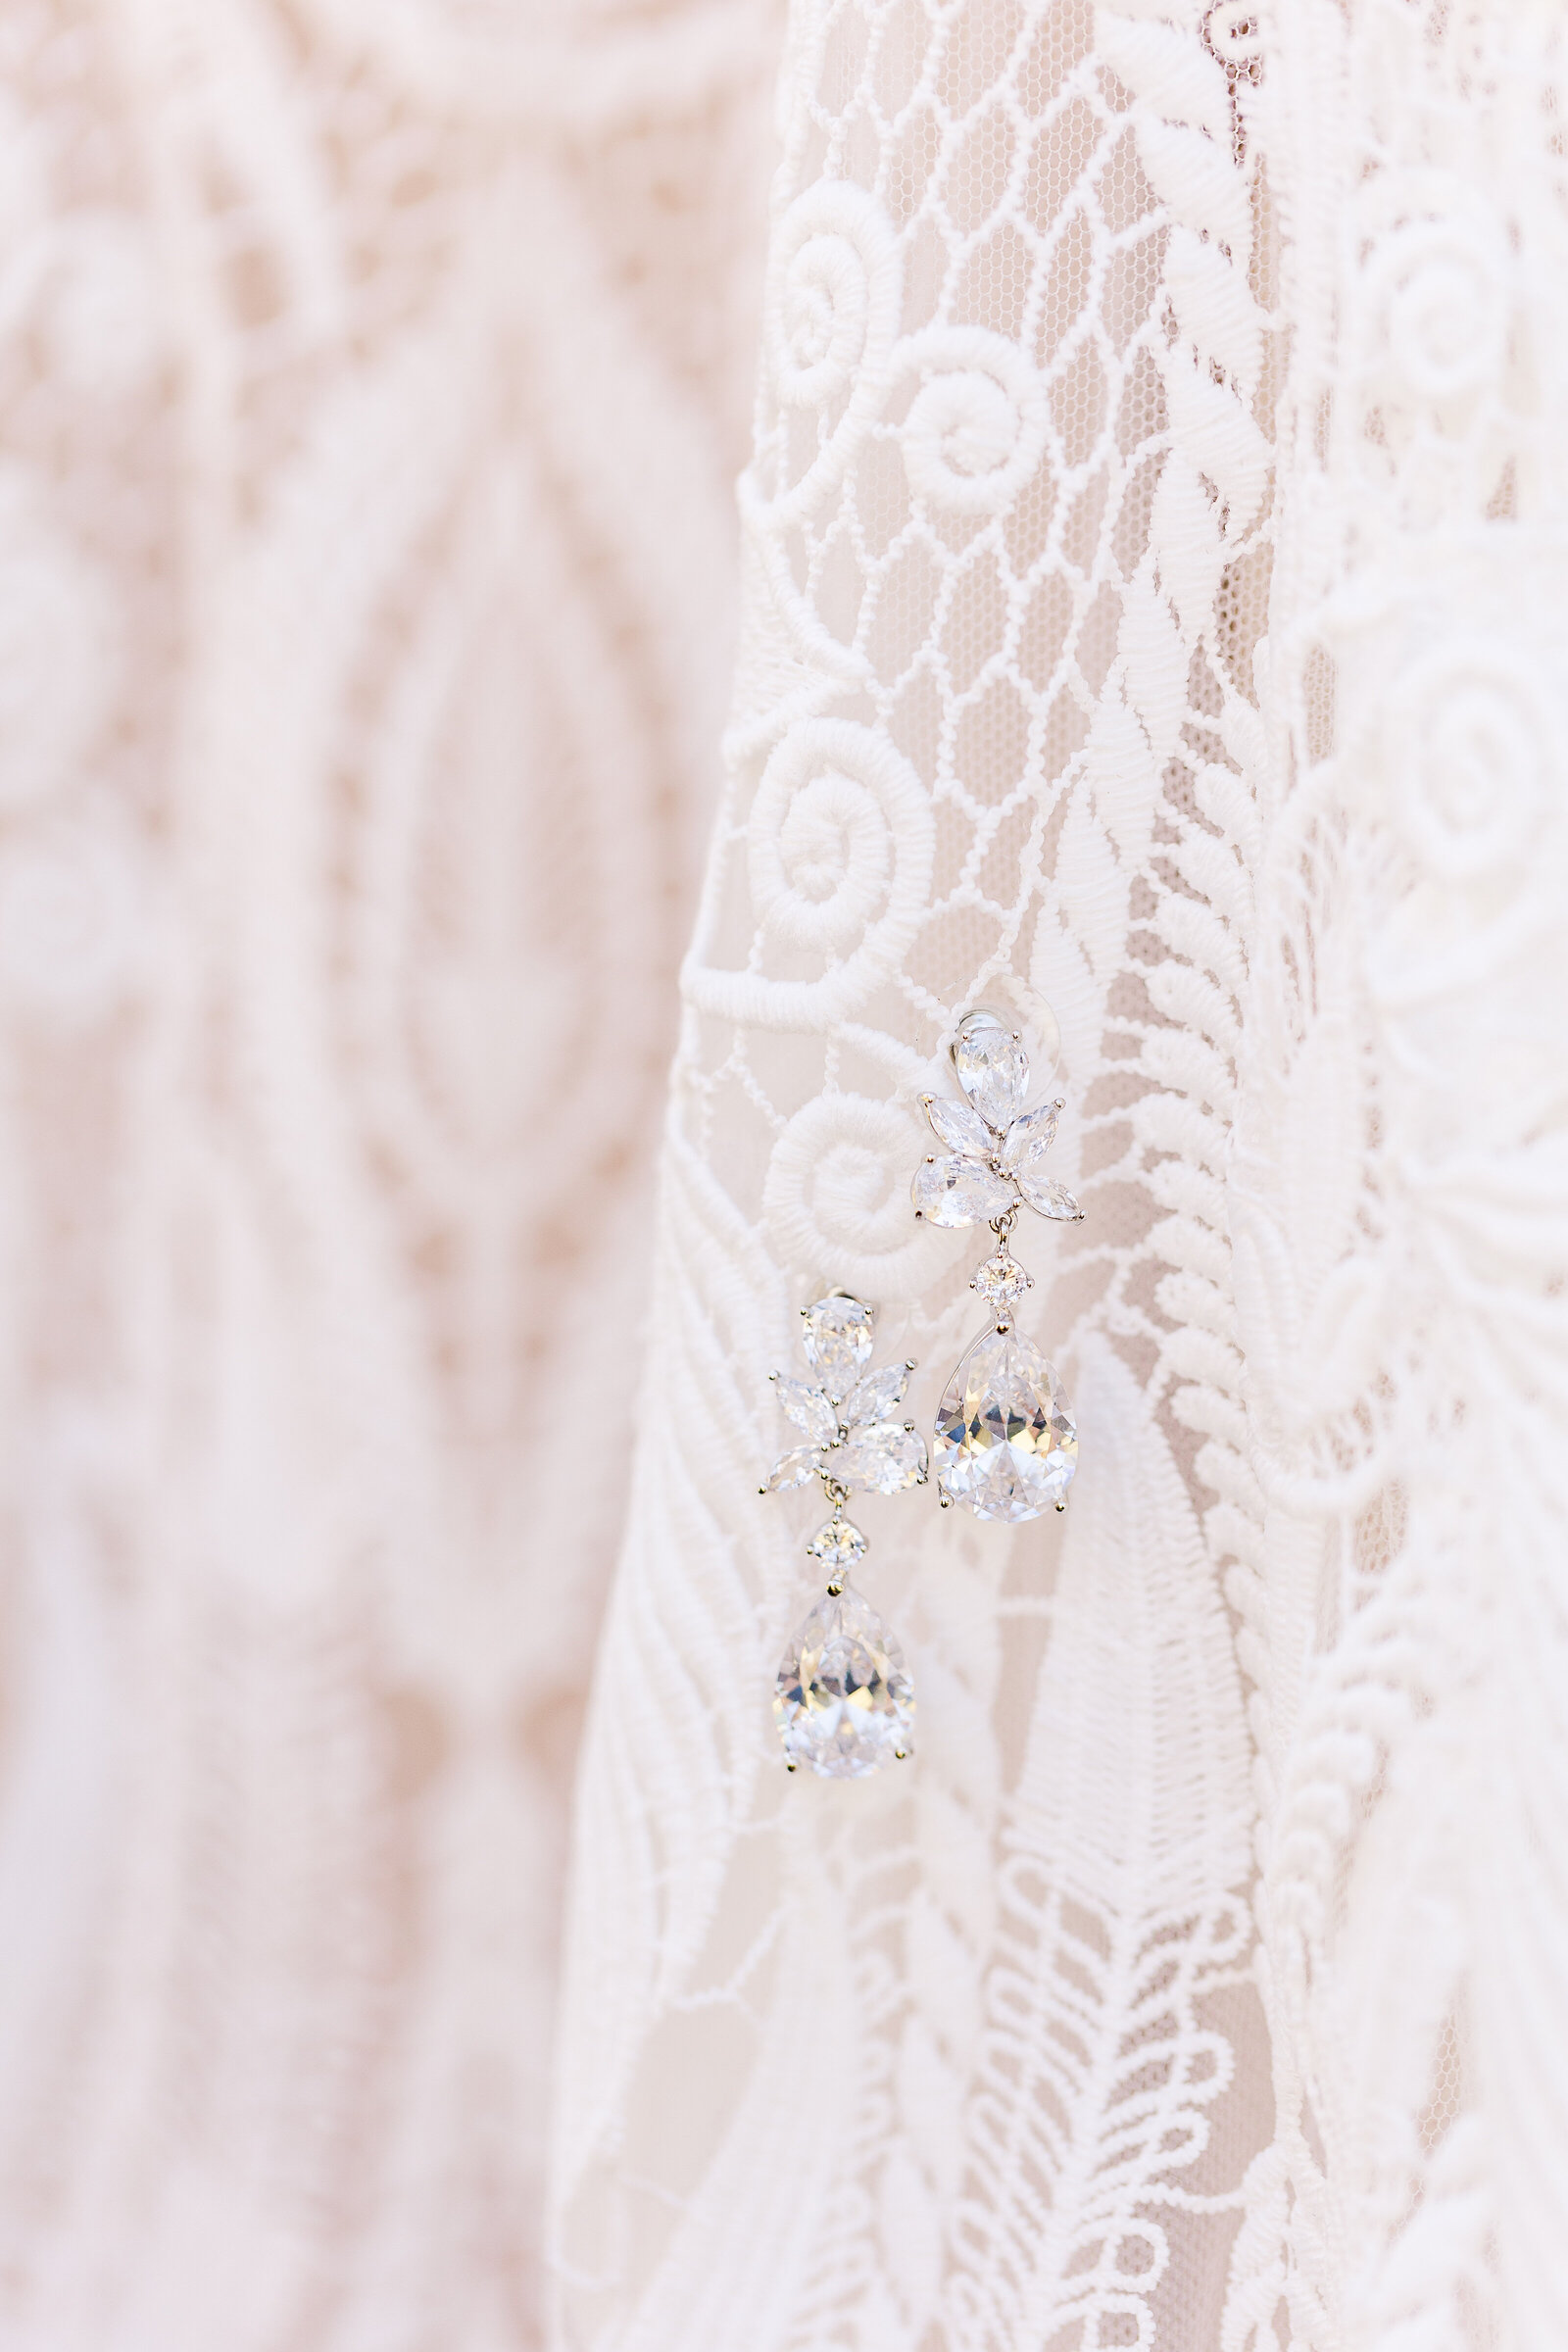 diamond earings on lace bridal gown